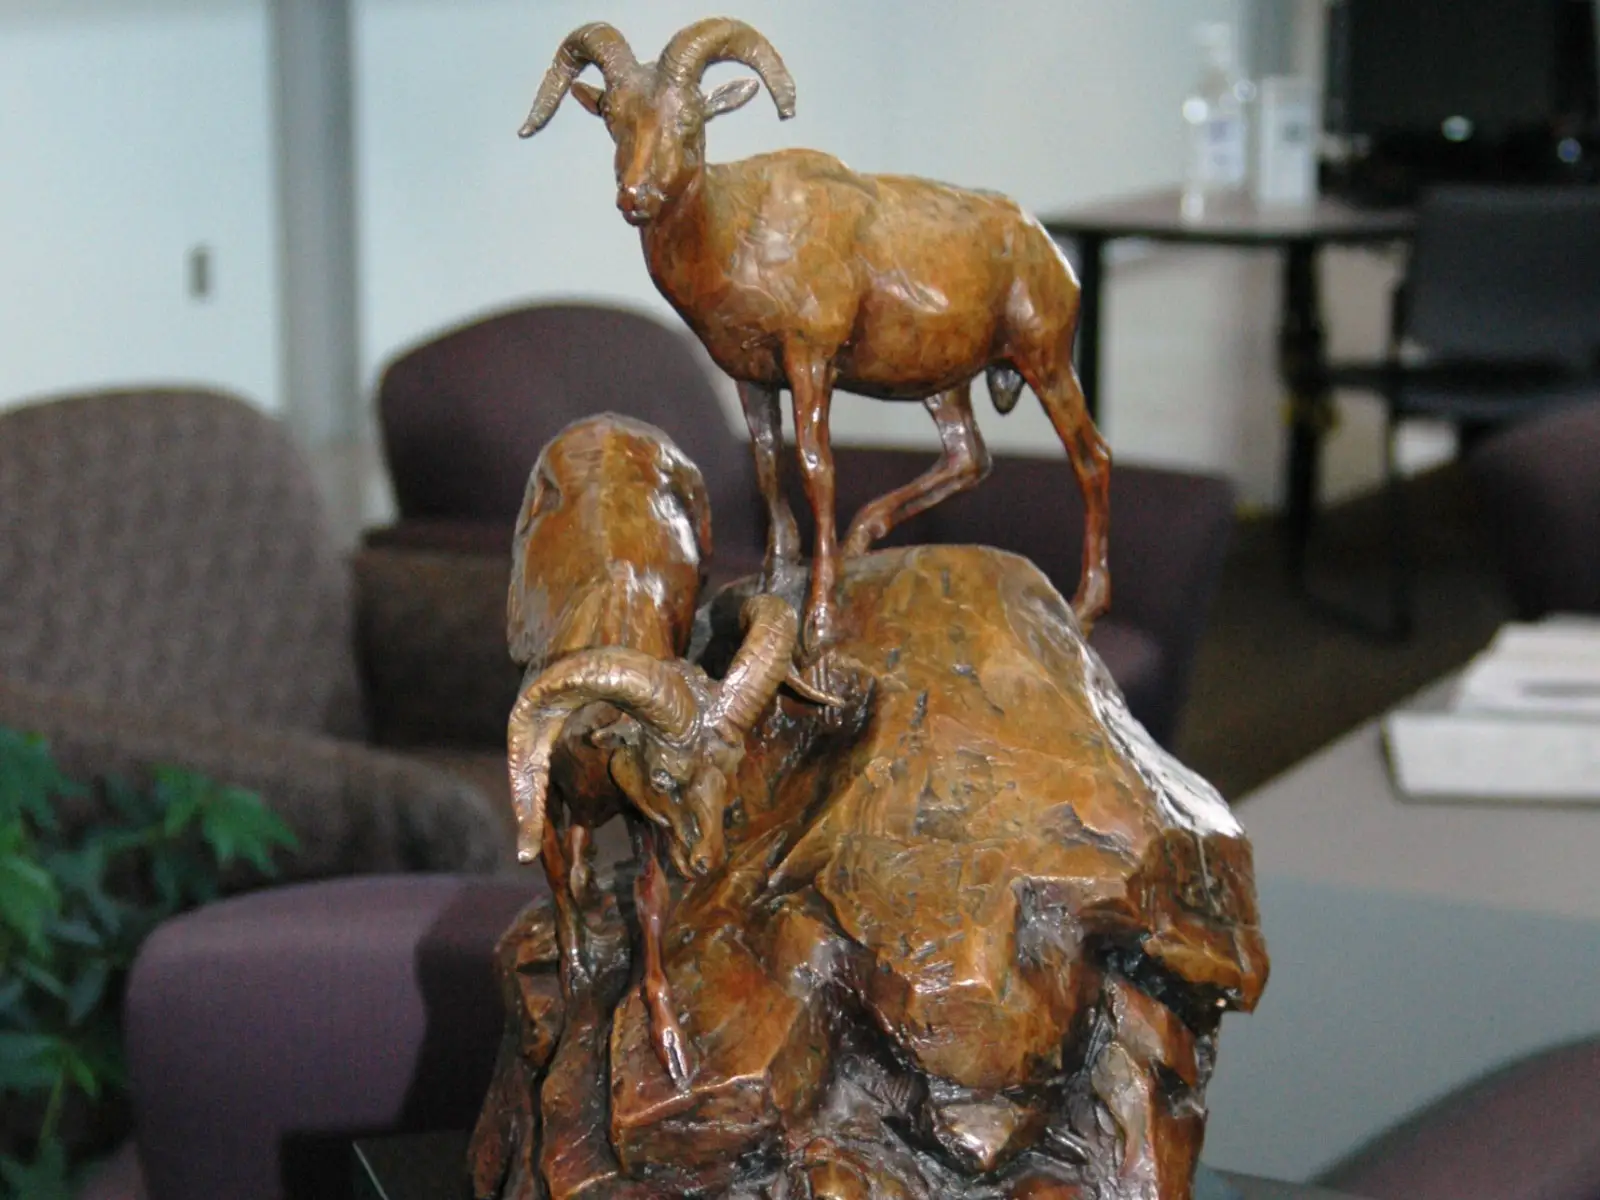 Statue art piece of two goats on a mountain in the Wilsonville campus' commons gallery